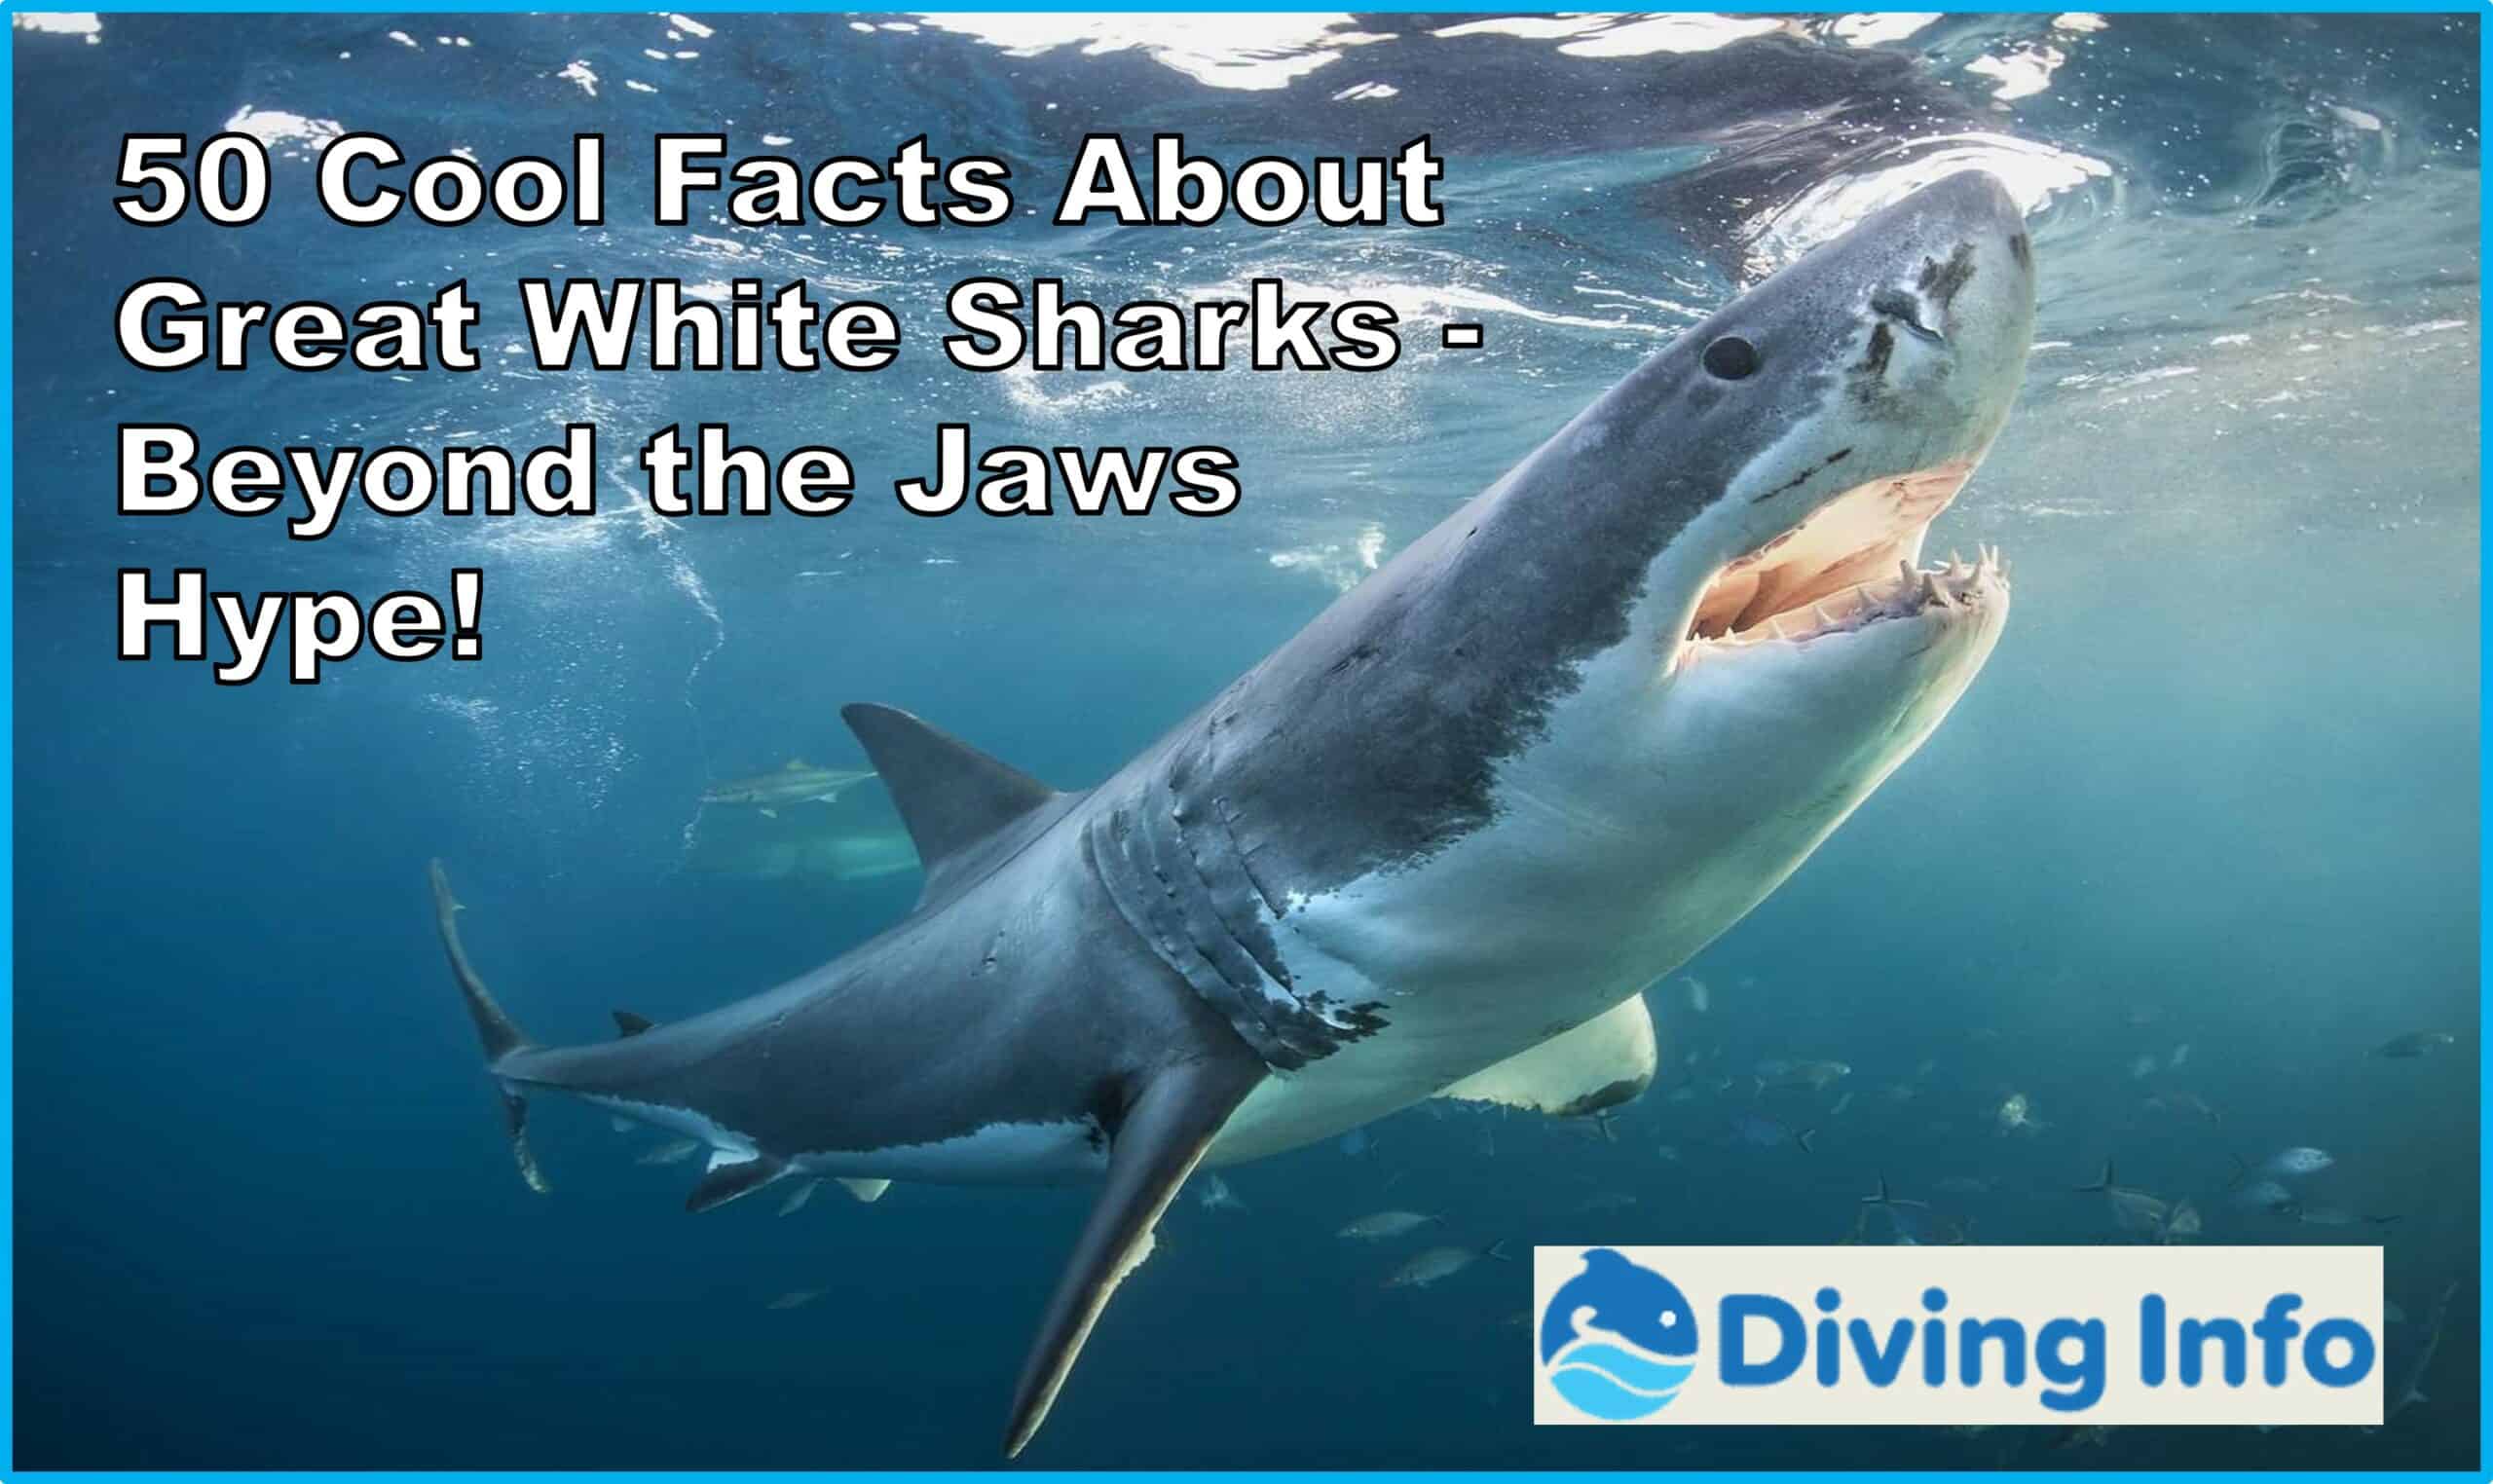 50 Cool Facts About Great White Sharks - Beyond the Jaws Hype